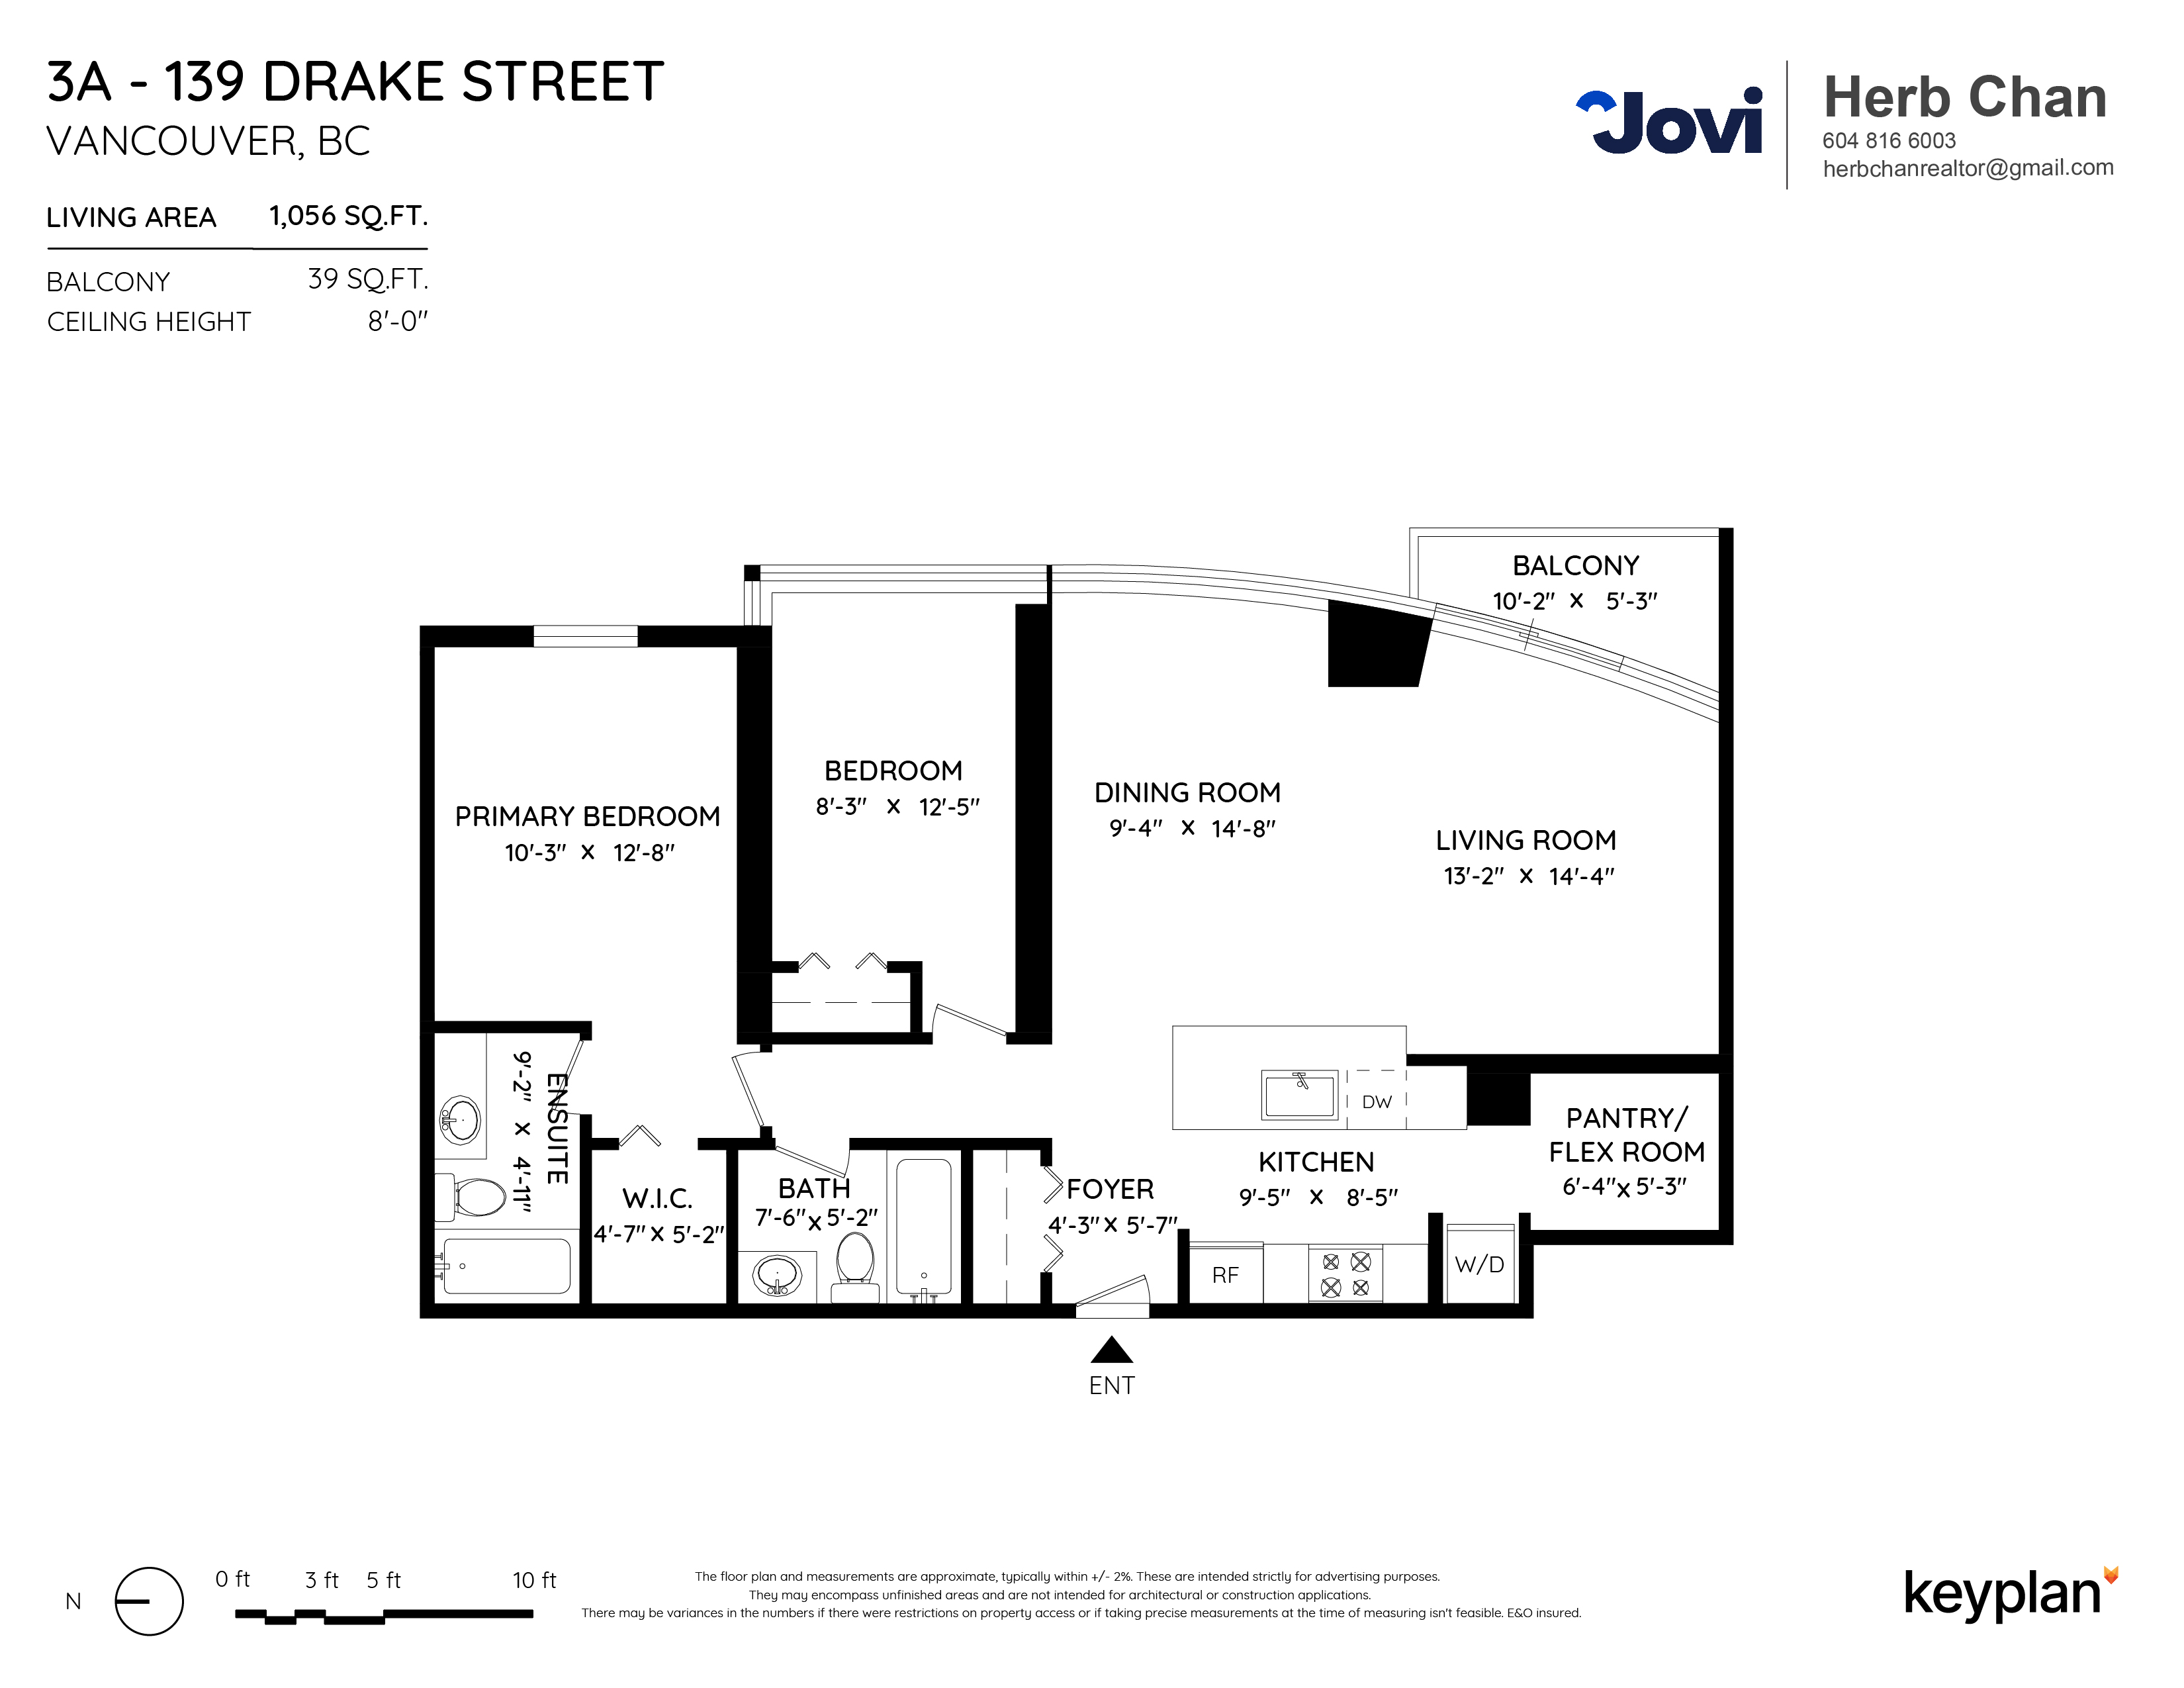 Herb Chan - Unit 3A - 139 Drake Street, Vancouver, BC, Canada | Floor Plan 1